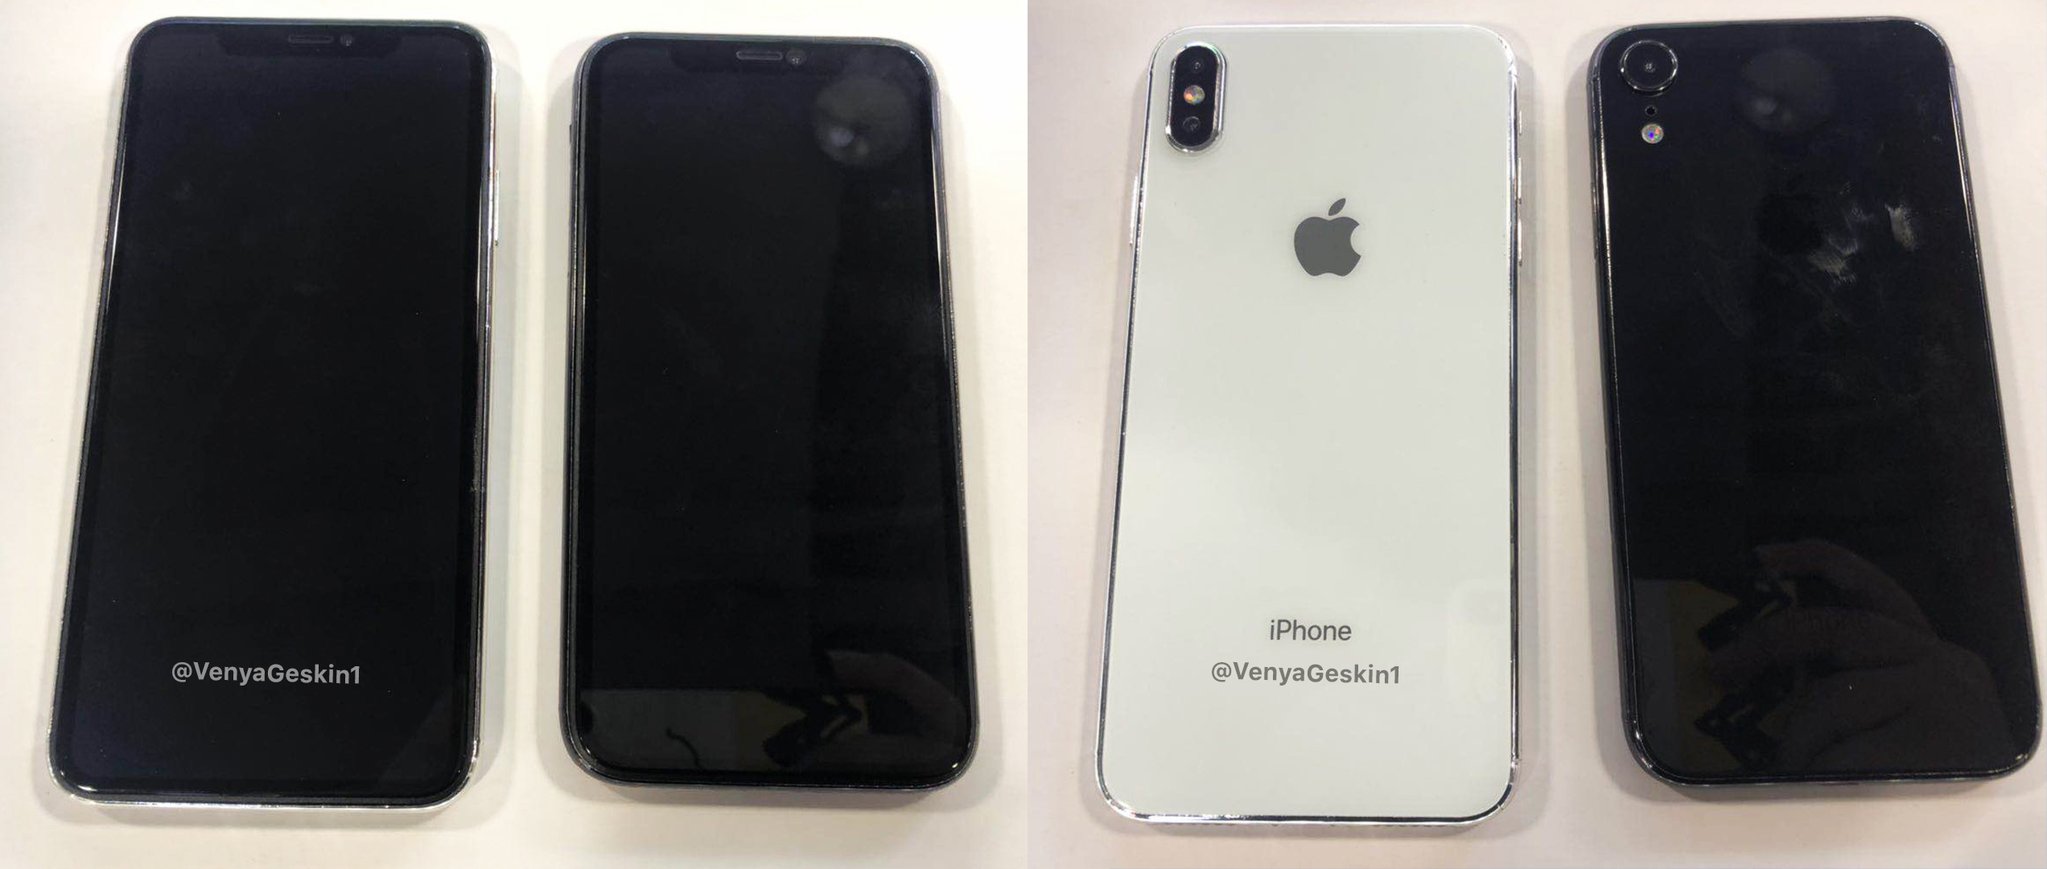 Newly leaked images show dummy units of 6.1-inch LCD iPhone and a 6.5-inch iPhone X Plus